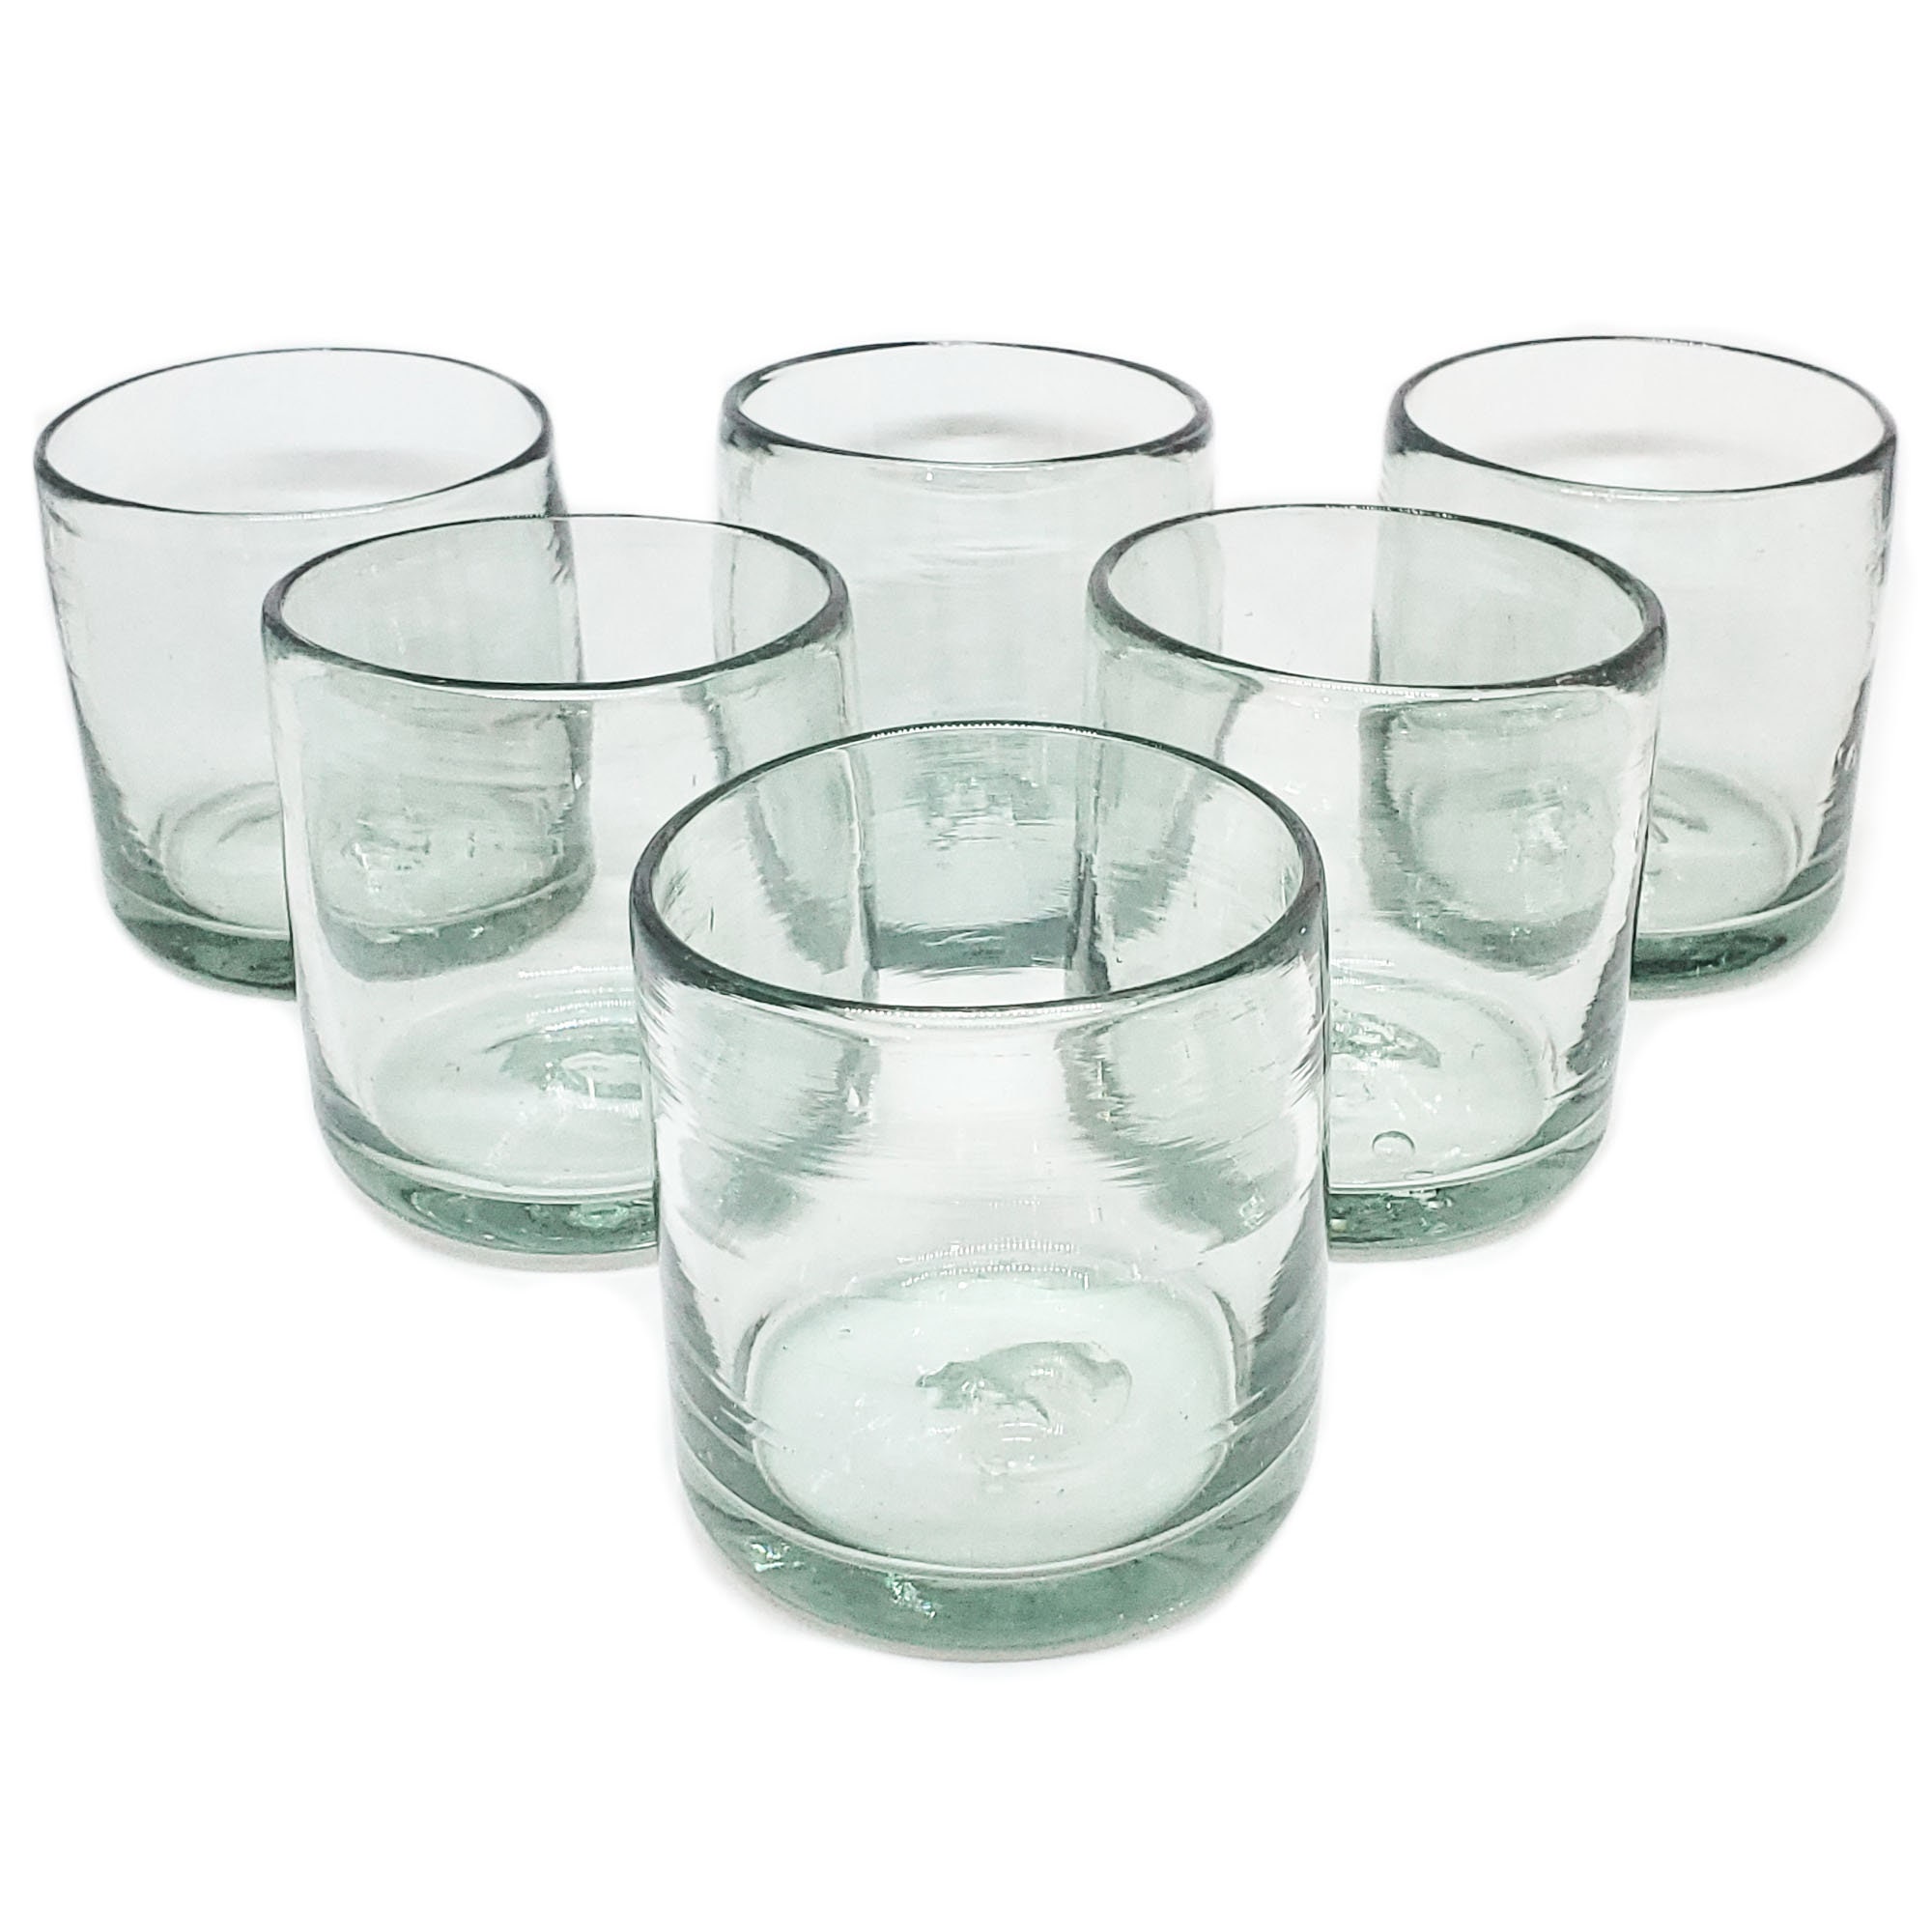 MEXHANDCRAFT Solid Aqua Blue 14 oz Drinking Glasses (Set of 6), Recycled Glass, Lead-Free, Toxin-Free (14oz Drinking)